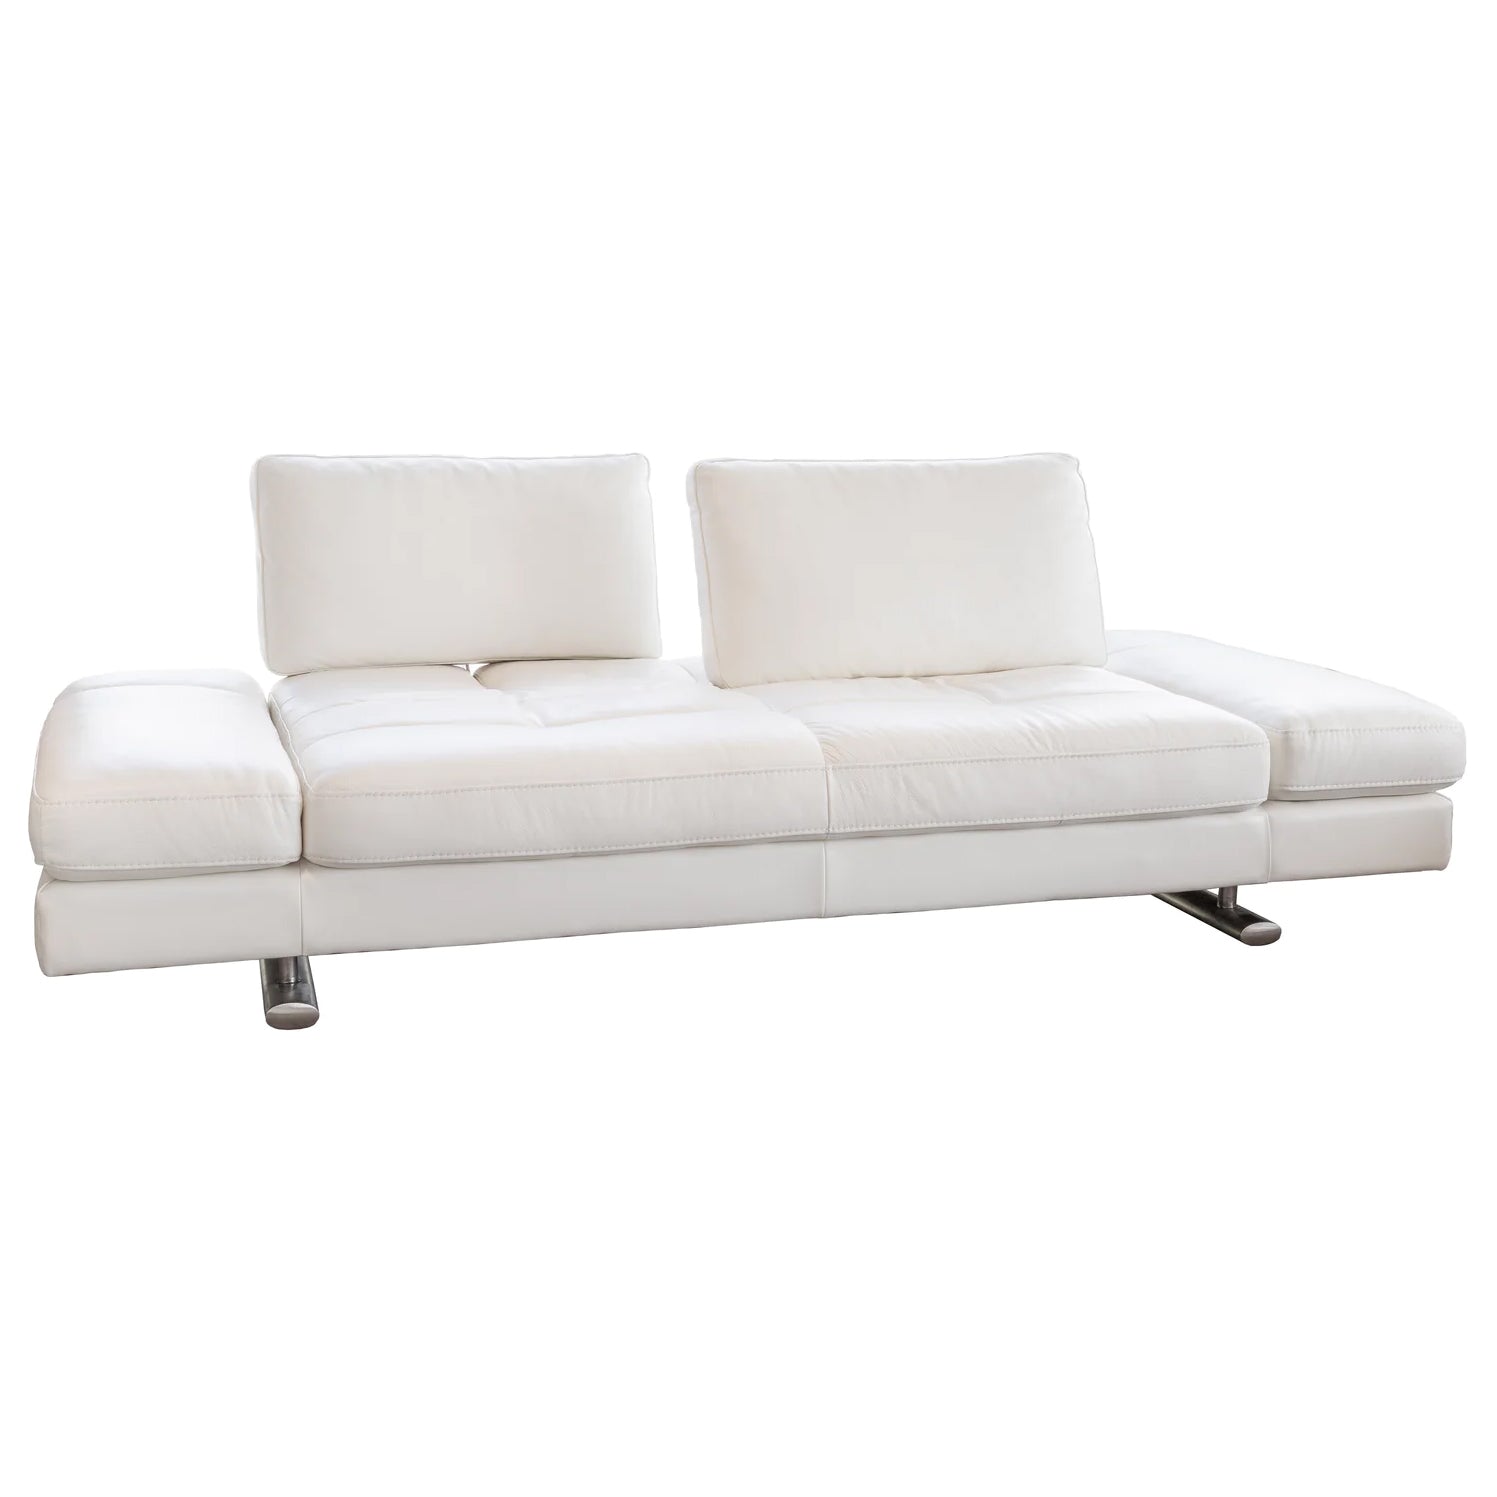 1372 Movable Back Loveseat - White Leather